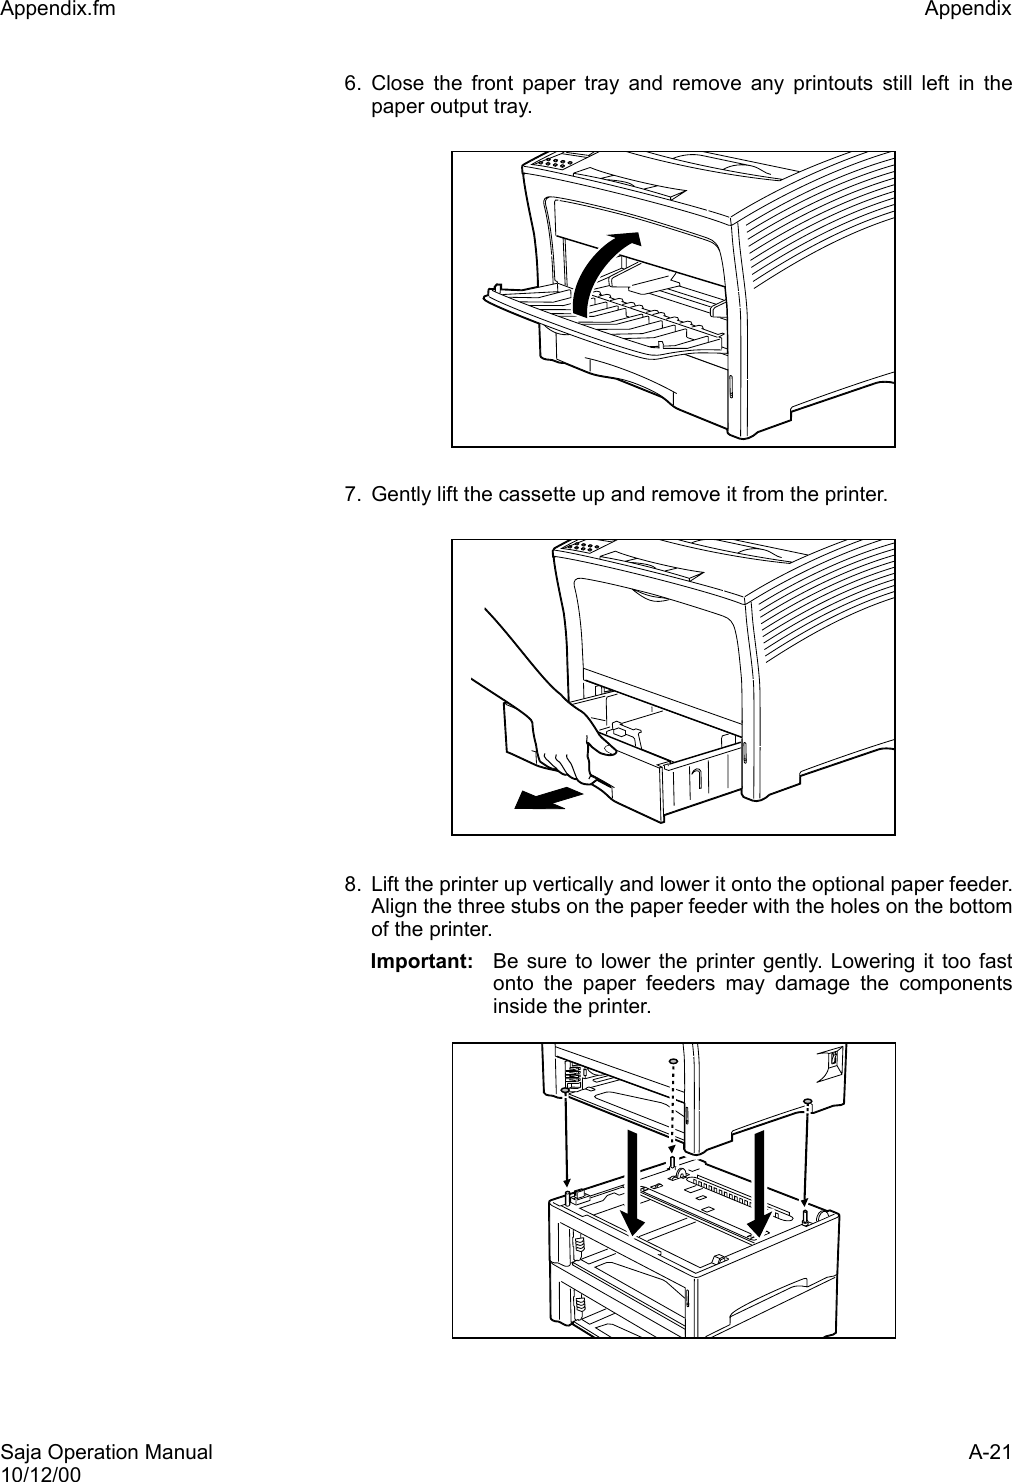 Saja Operation Manual A-2110/12/00Appendix.fm Appendix 6. Close the front paper tray and remove any printouts still left in thepaper output tray. 7. Gently lift the cassette up and remove it from the printer. 8. Lift the printer up vertically and lower it onto the optional paper feeder.Align the three stubs on the paper feeder with the holes on the bottomof the printer.Important: Be sure to lower the printer gently. Lowering it too fastonto the paper feeders may damage the componentsinside the printer.